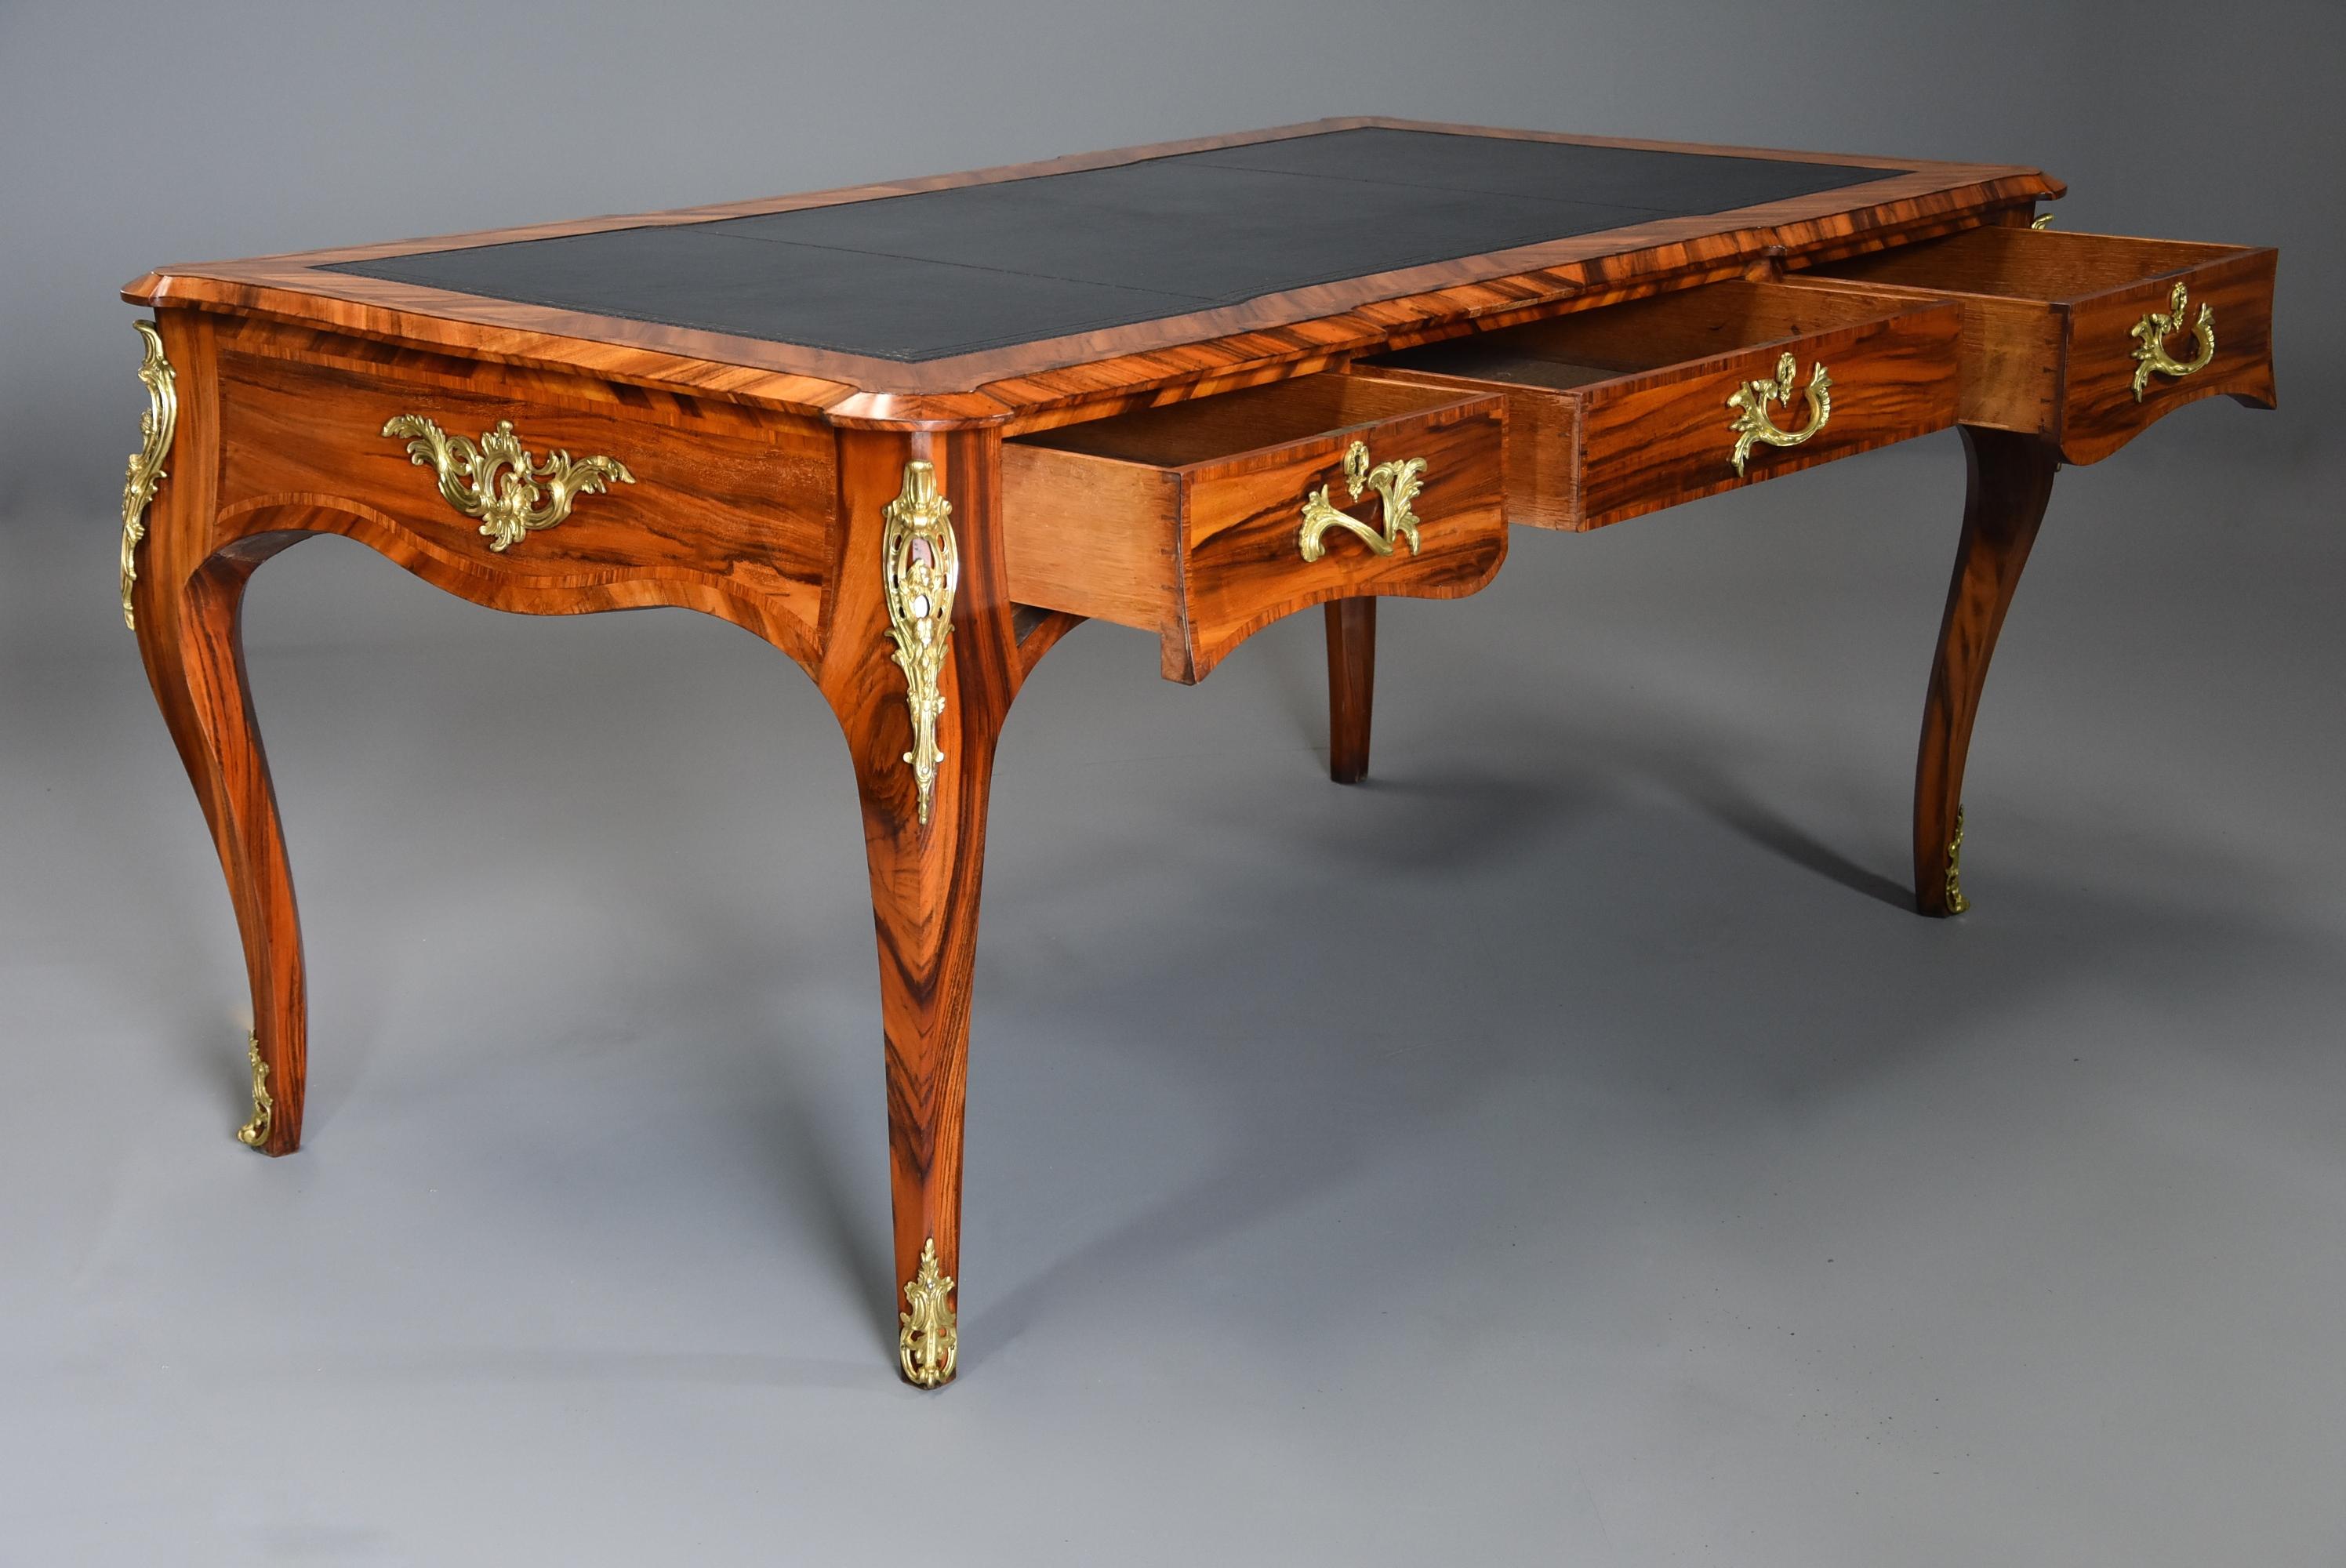 Fine Quality Mid-19th Century Goncalo Alves Bureau Plat in the French Style In Good Condition For Sale In Suffolk, GB